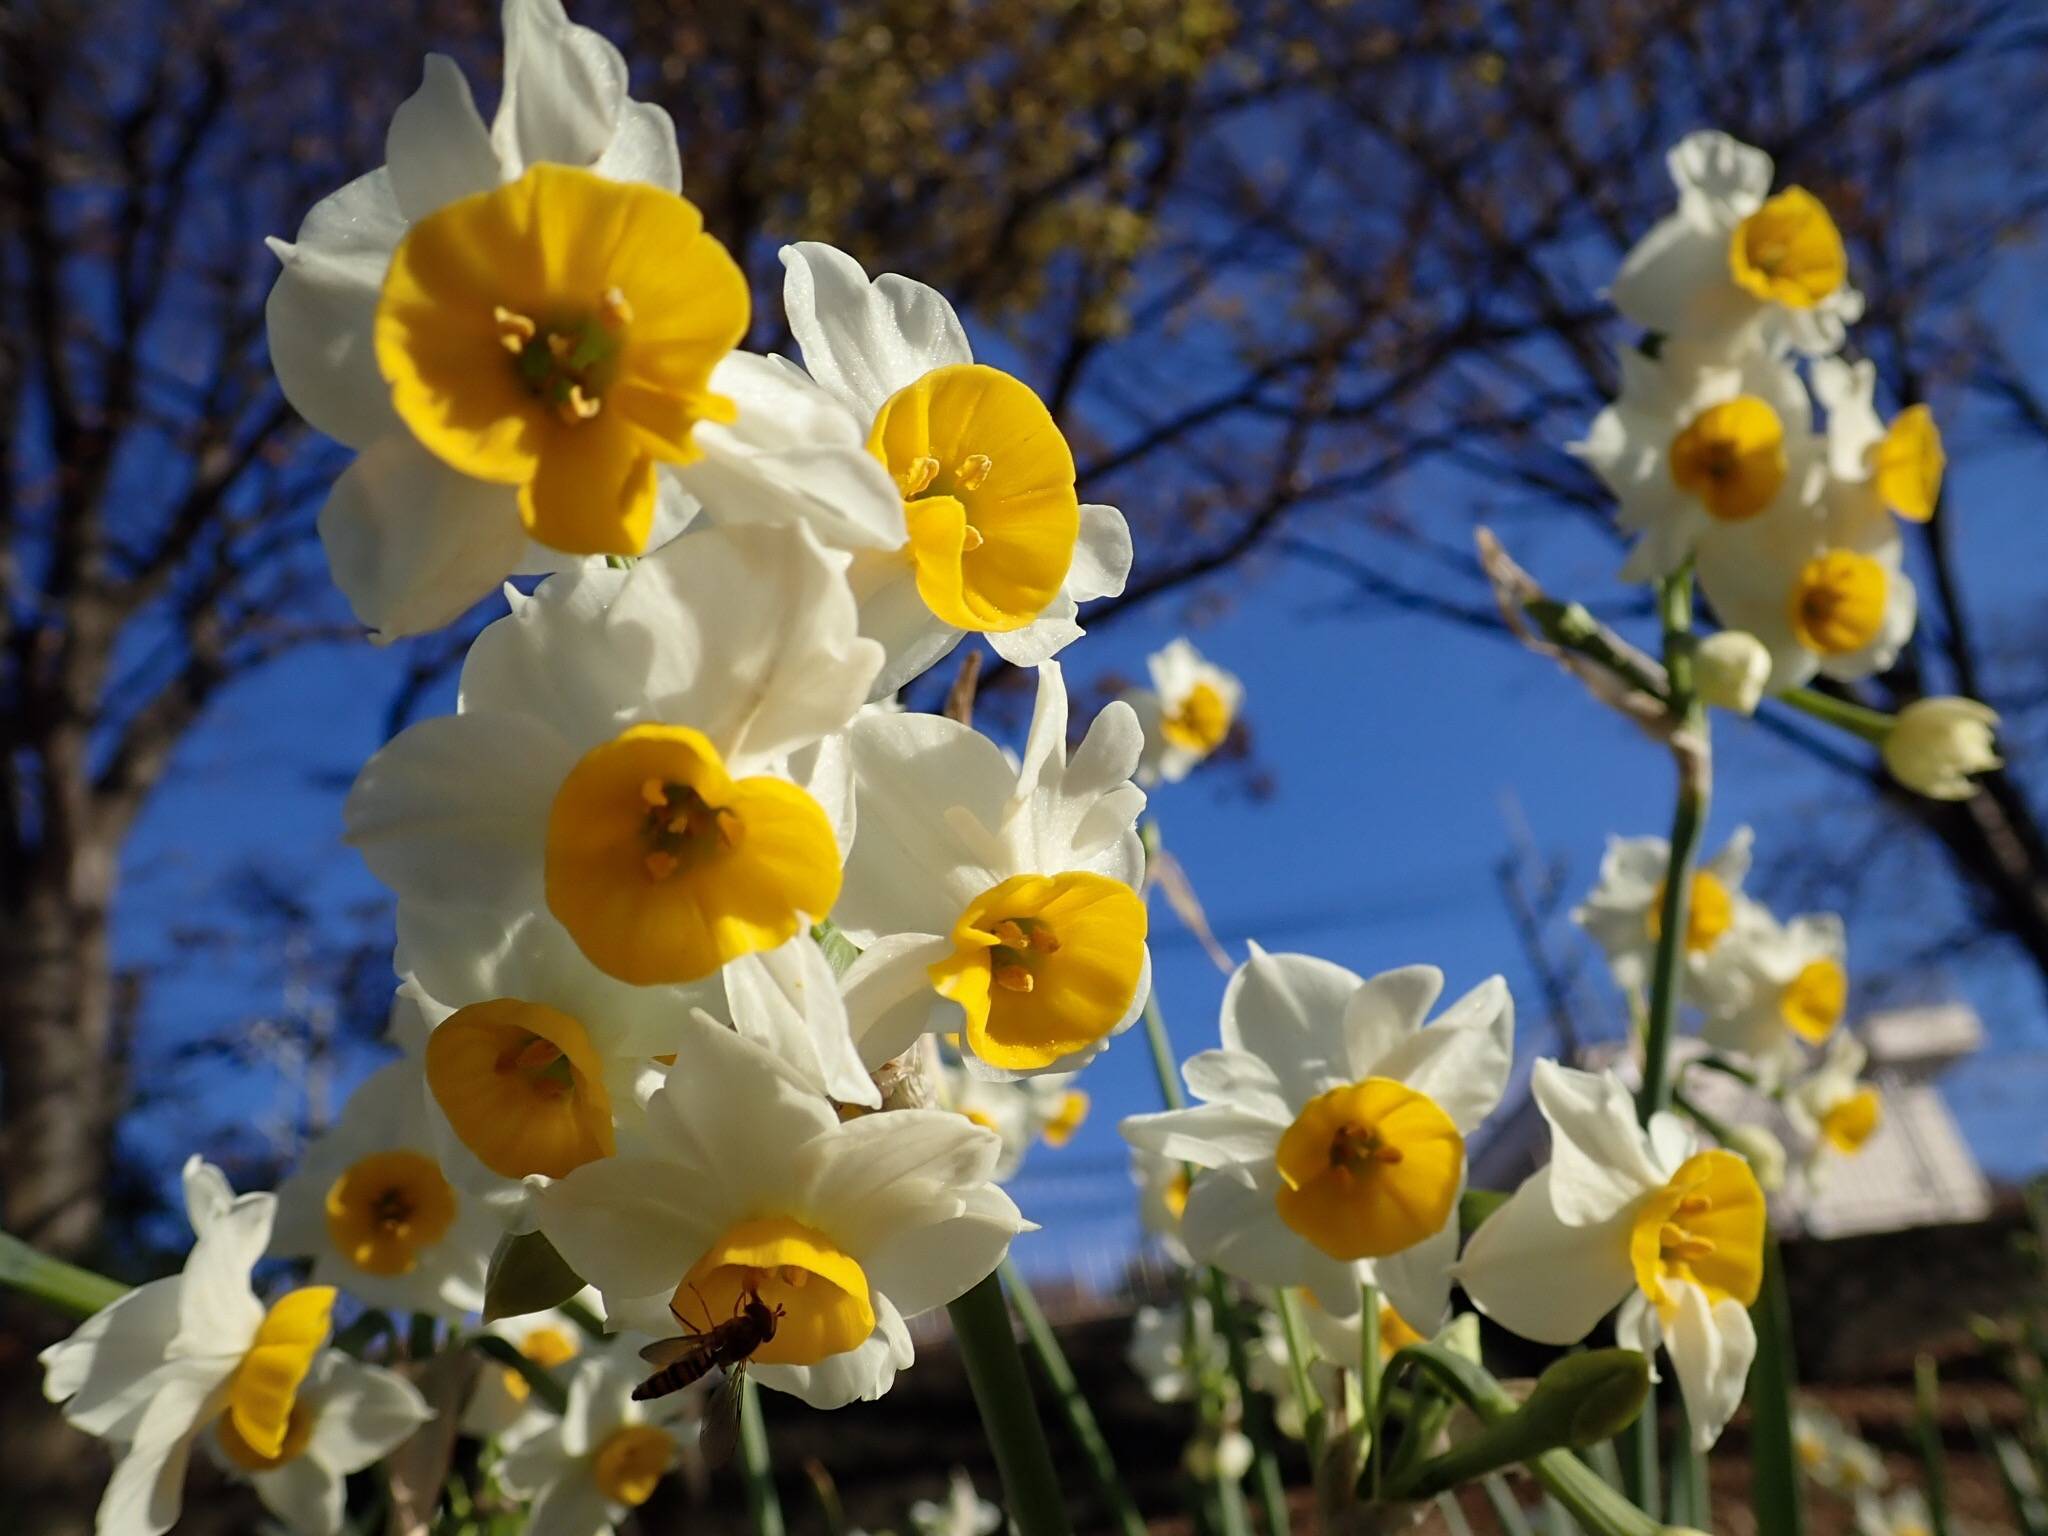 
Narcissus 'Blues'; white-yellow, shiny flowers with yellow, cup-like corona, yellow stamens, gray-green, slender stems